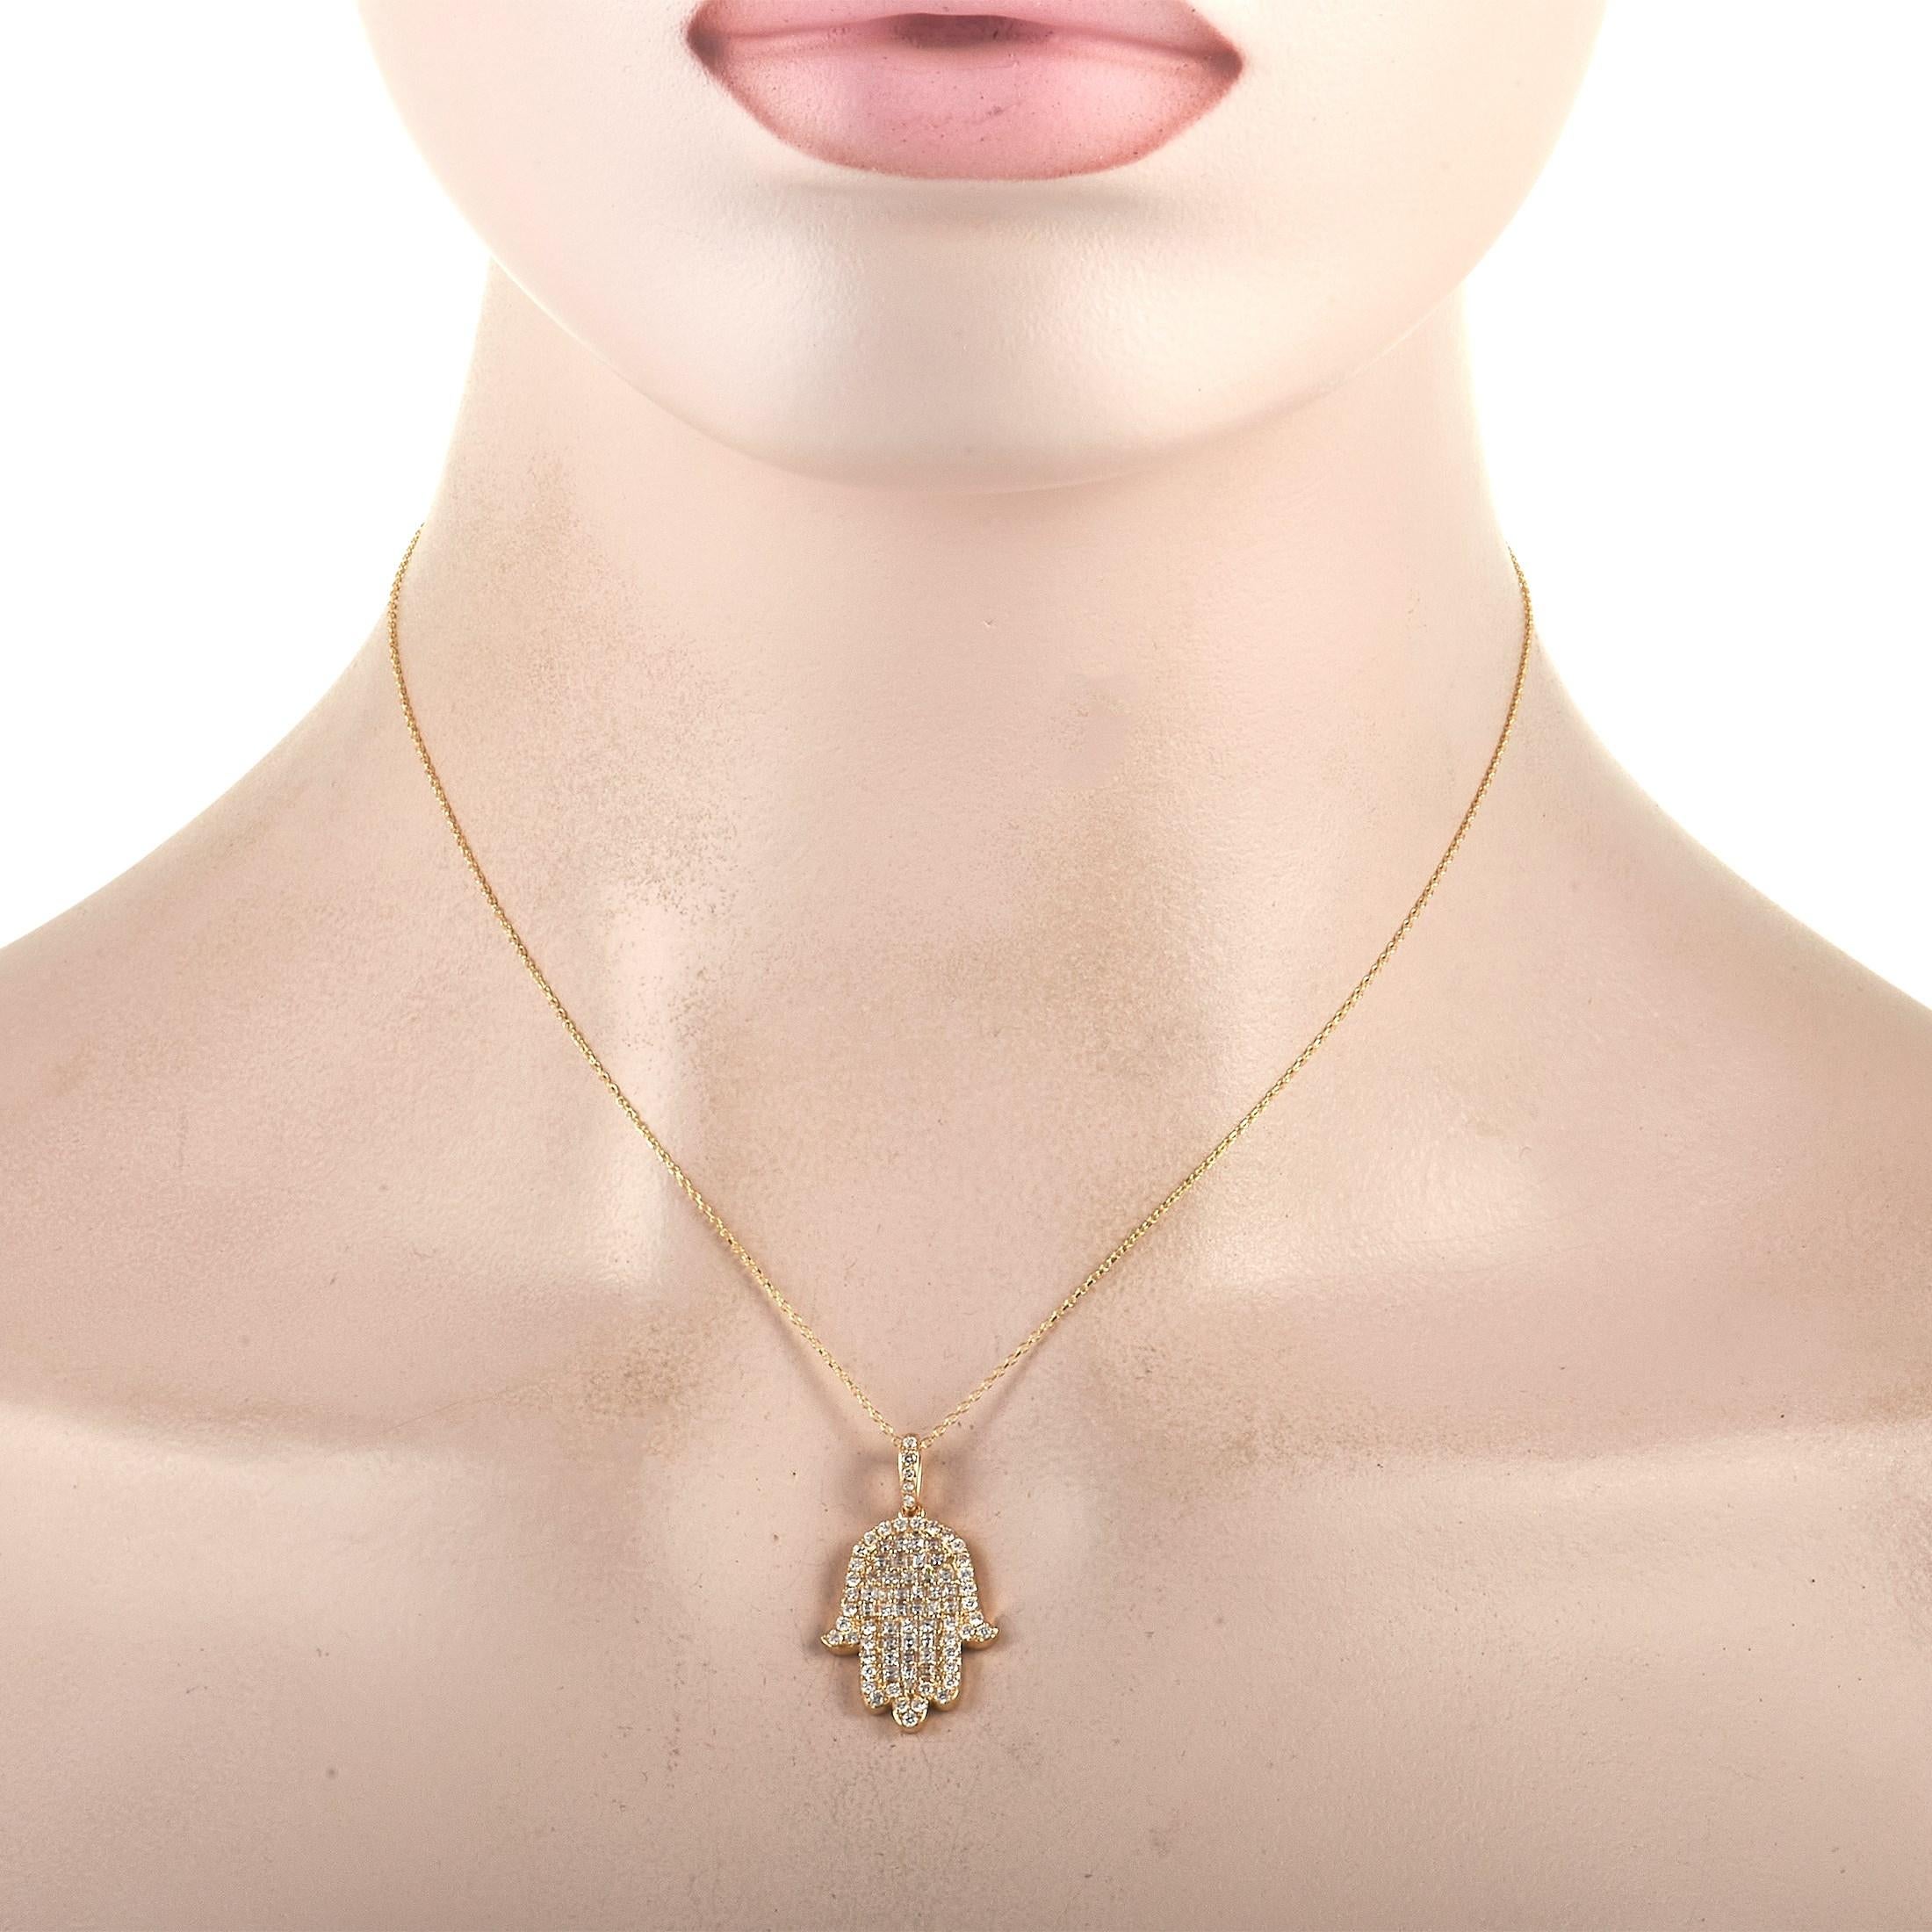 Wear this LB Exclusive 18K Yellow Gold Diamond Hamsa Necklace and make any outfit sparkle while attracting positive energy and good vibes. On a 16-inch long yellow gold chain is a sculpted Hamsa hand pendant completely covered in a combination of